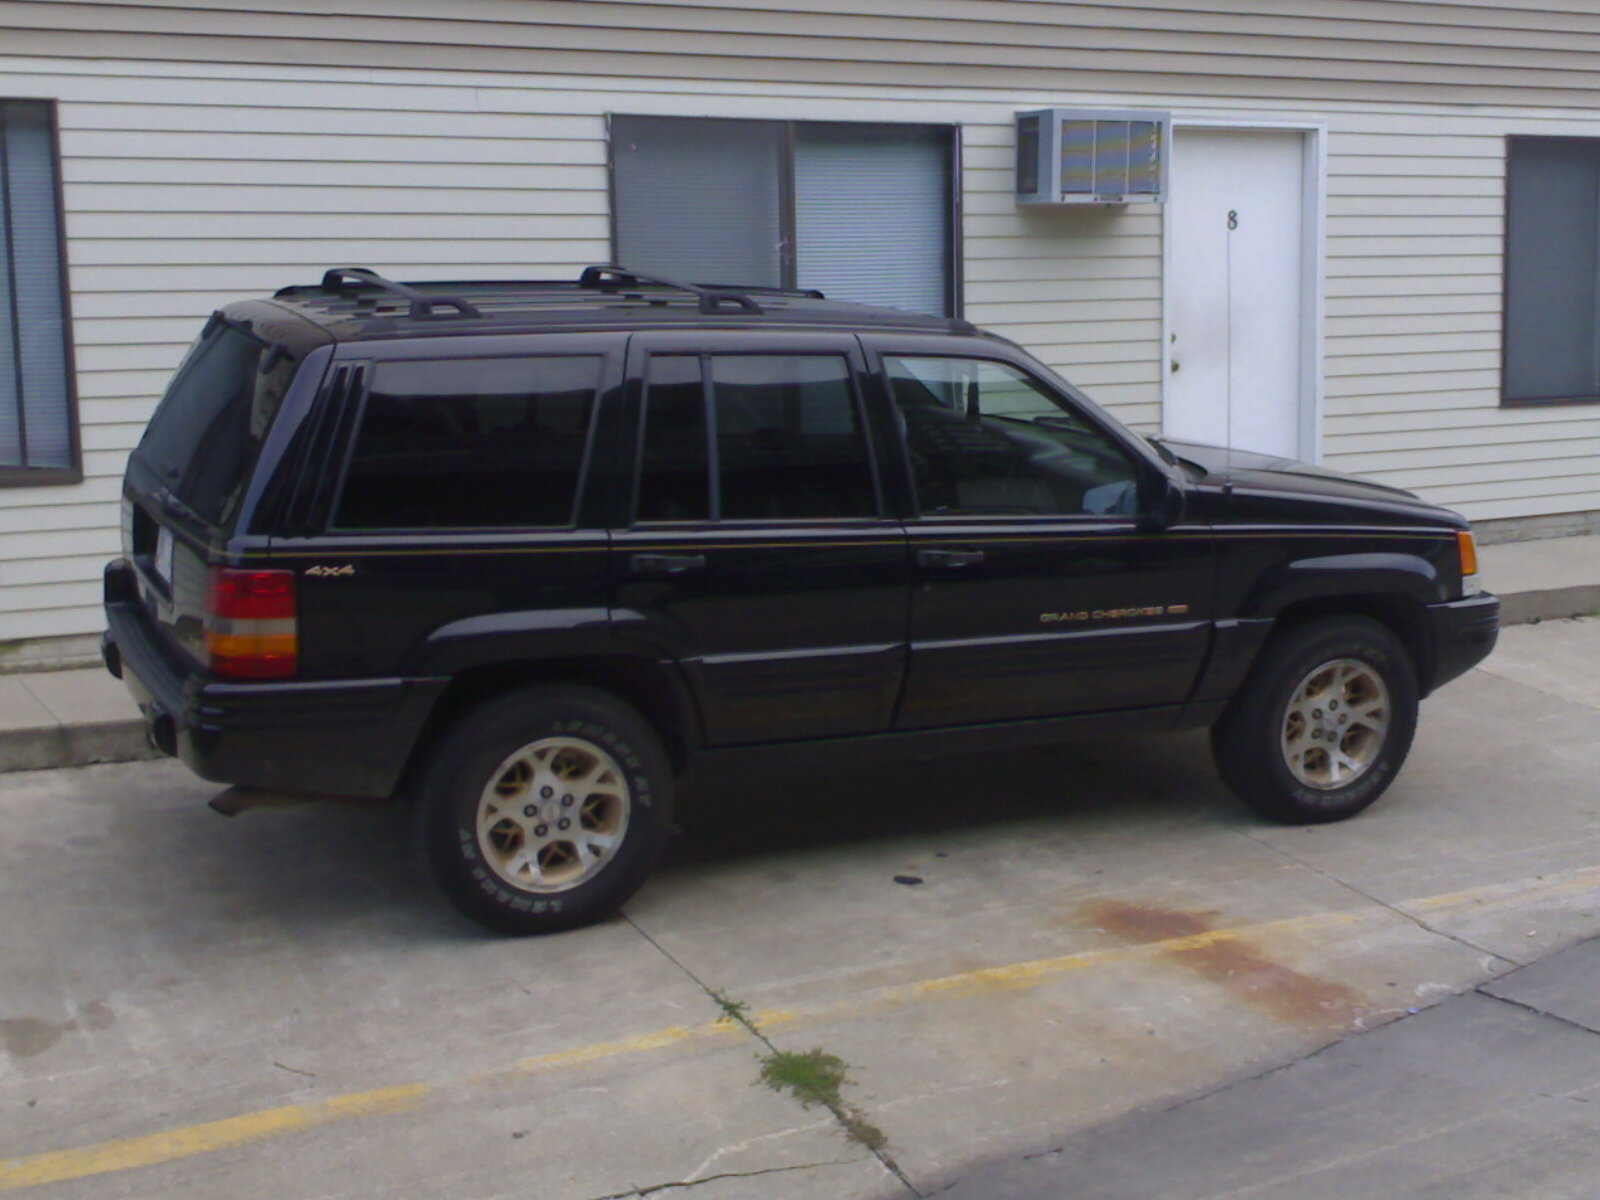 1997 Jeep grand cherokee limited edition reviews #5